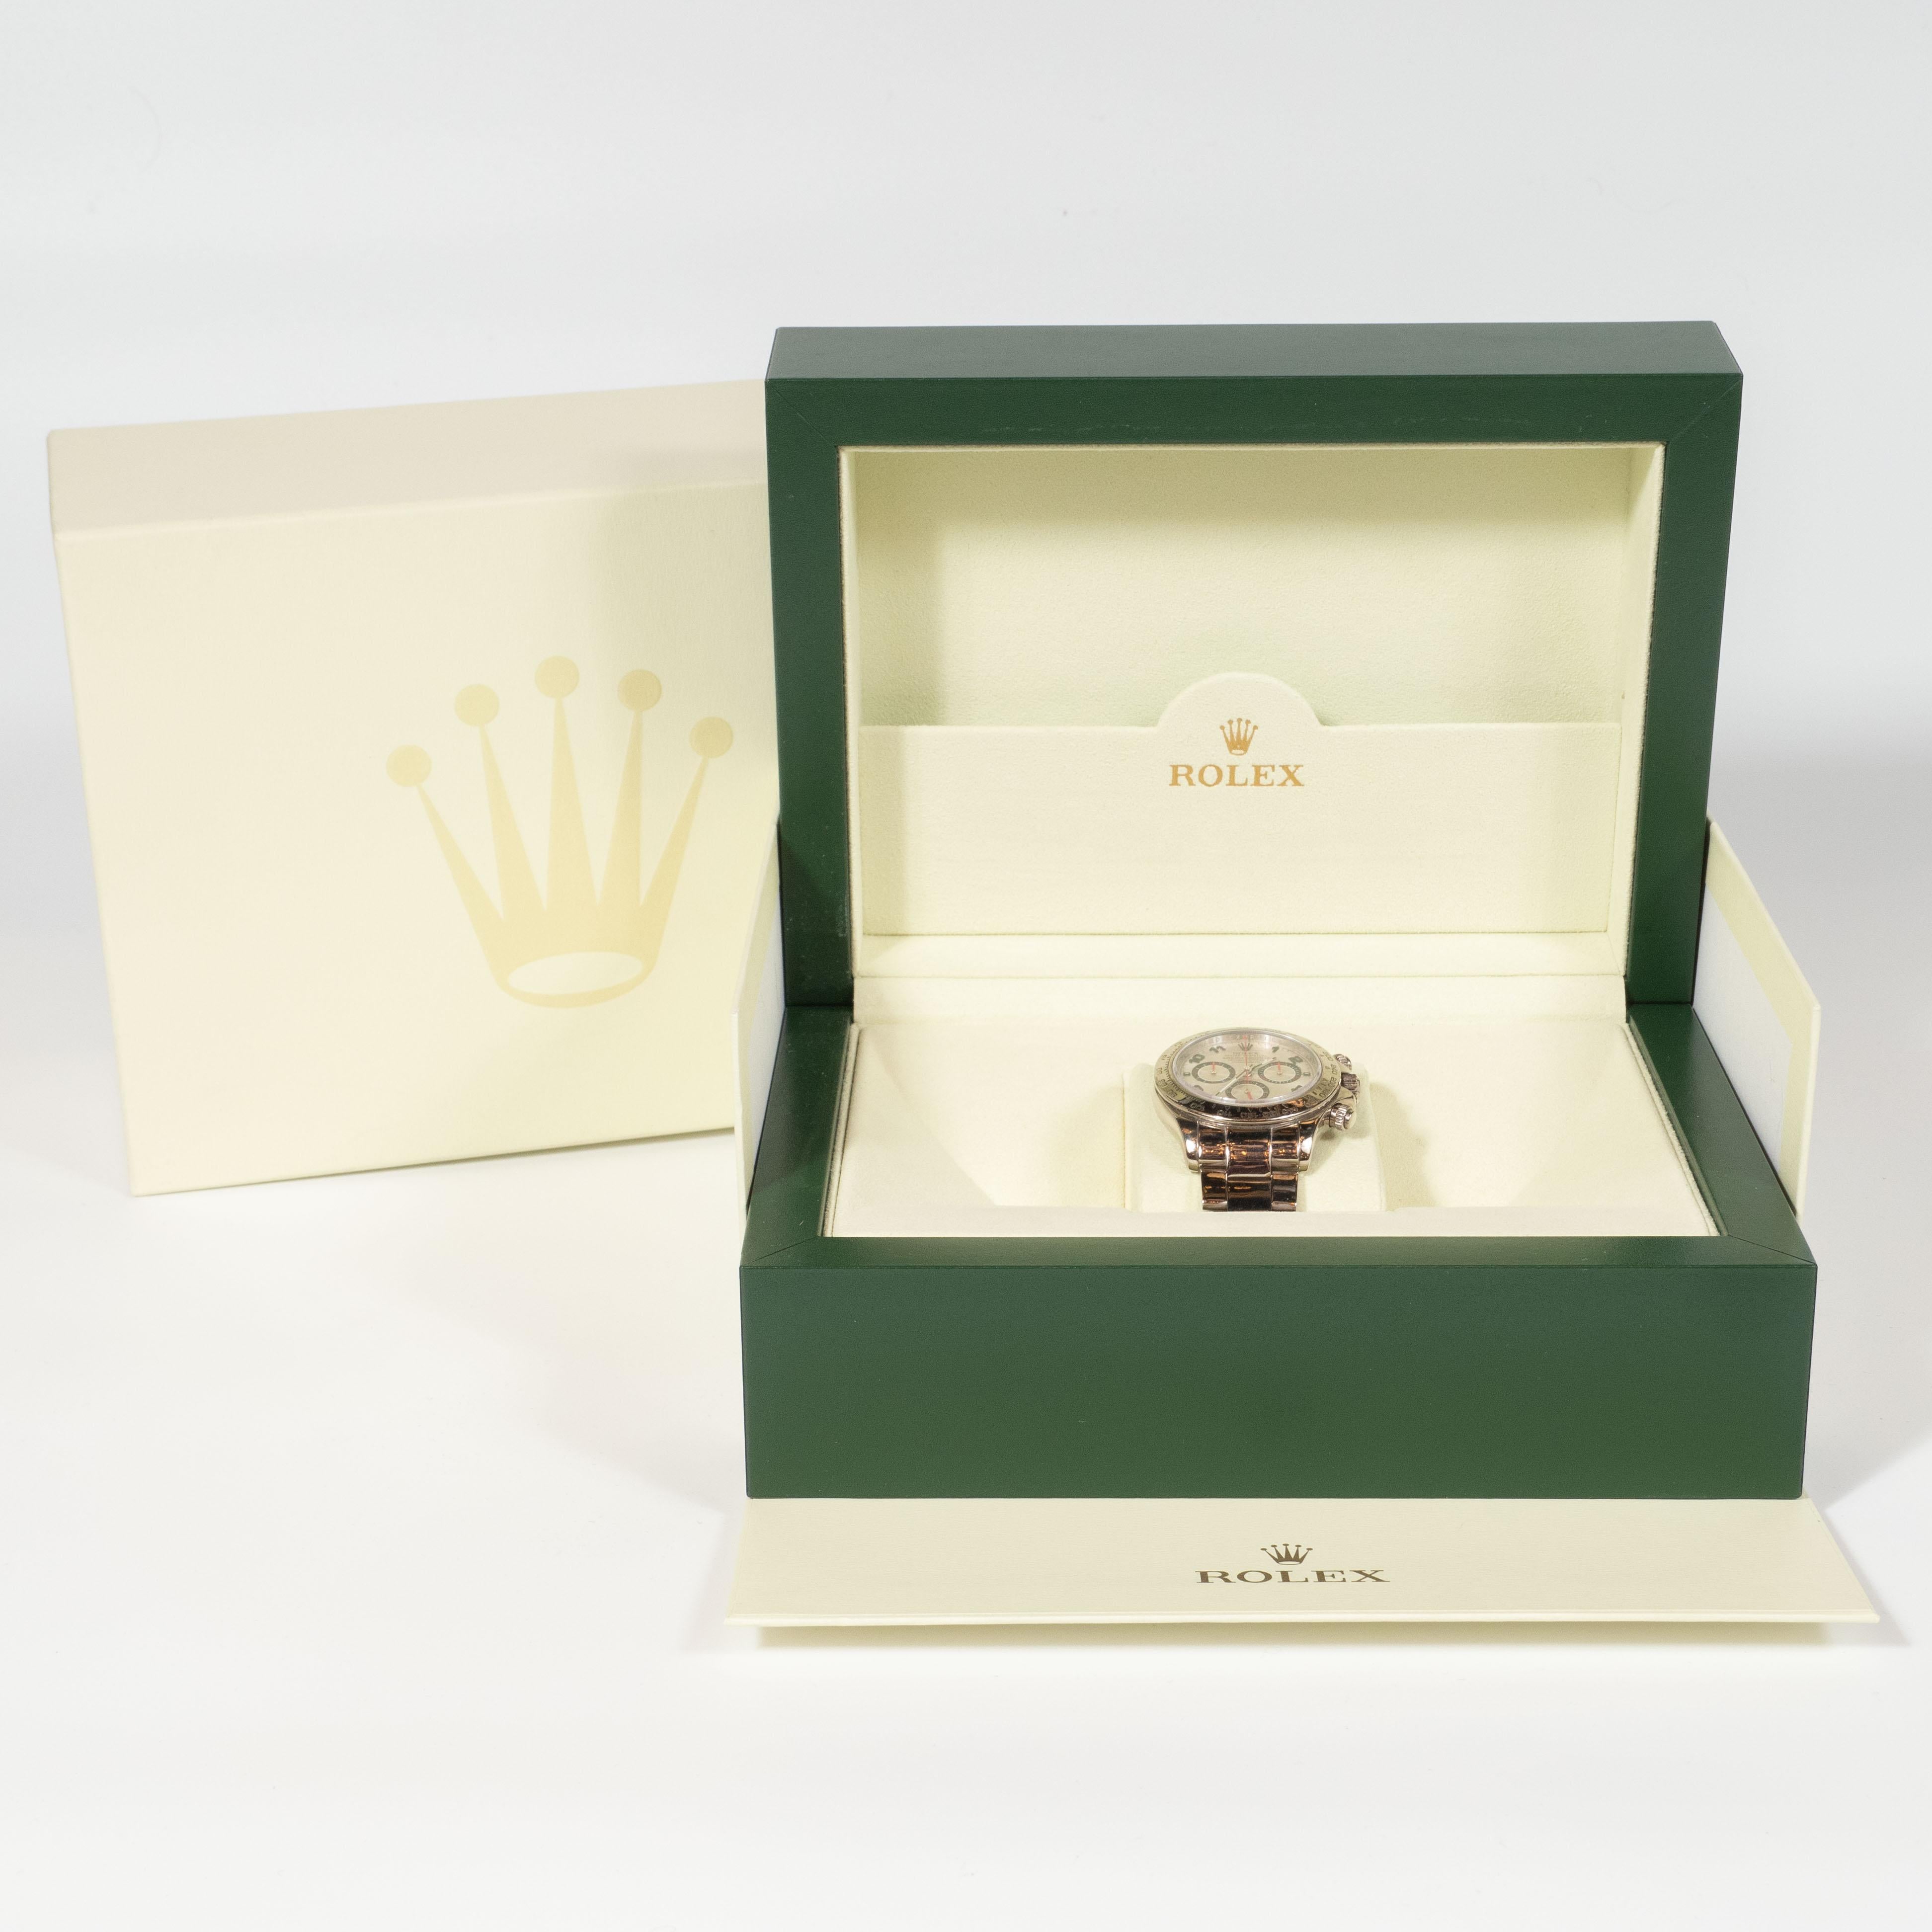 Rolex White Gold Cosmograph Daytona Wristwatch Ref 116509 with Box & Papers 11